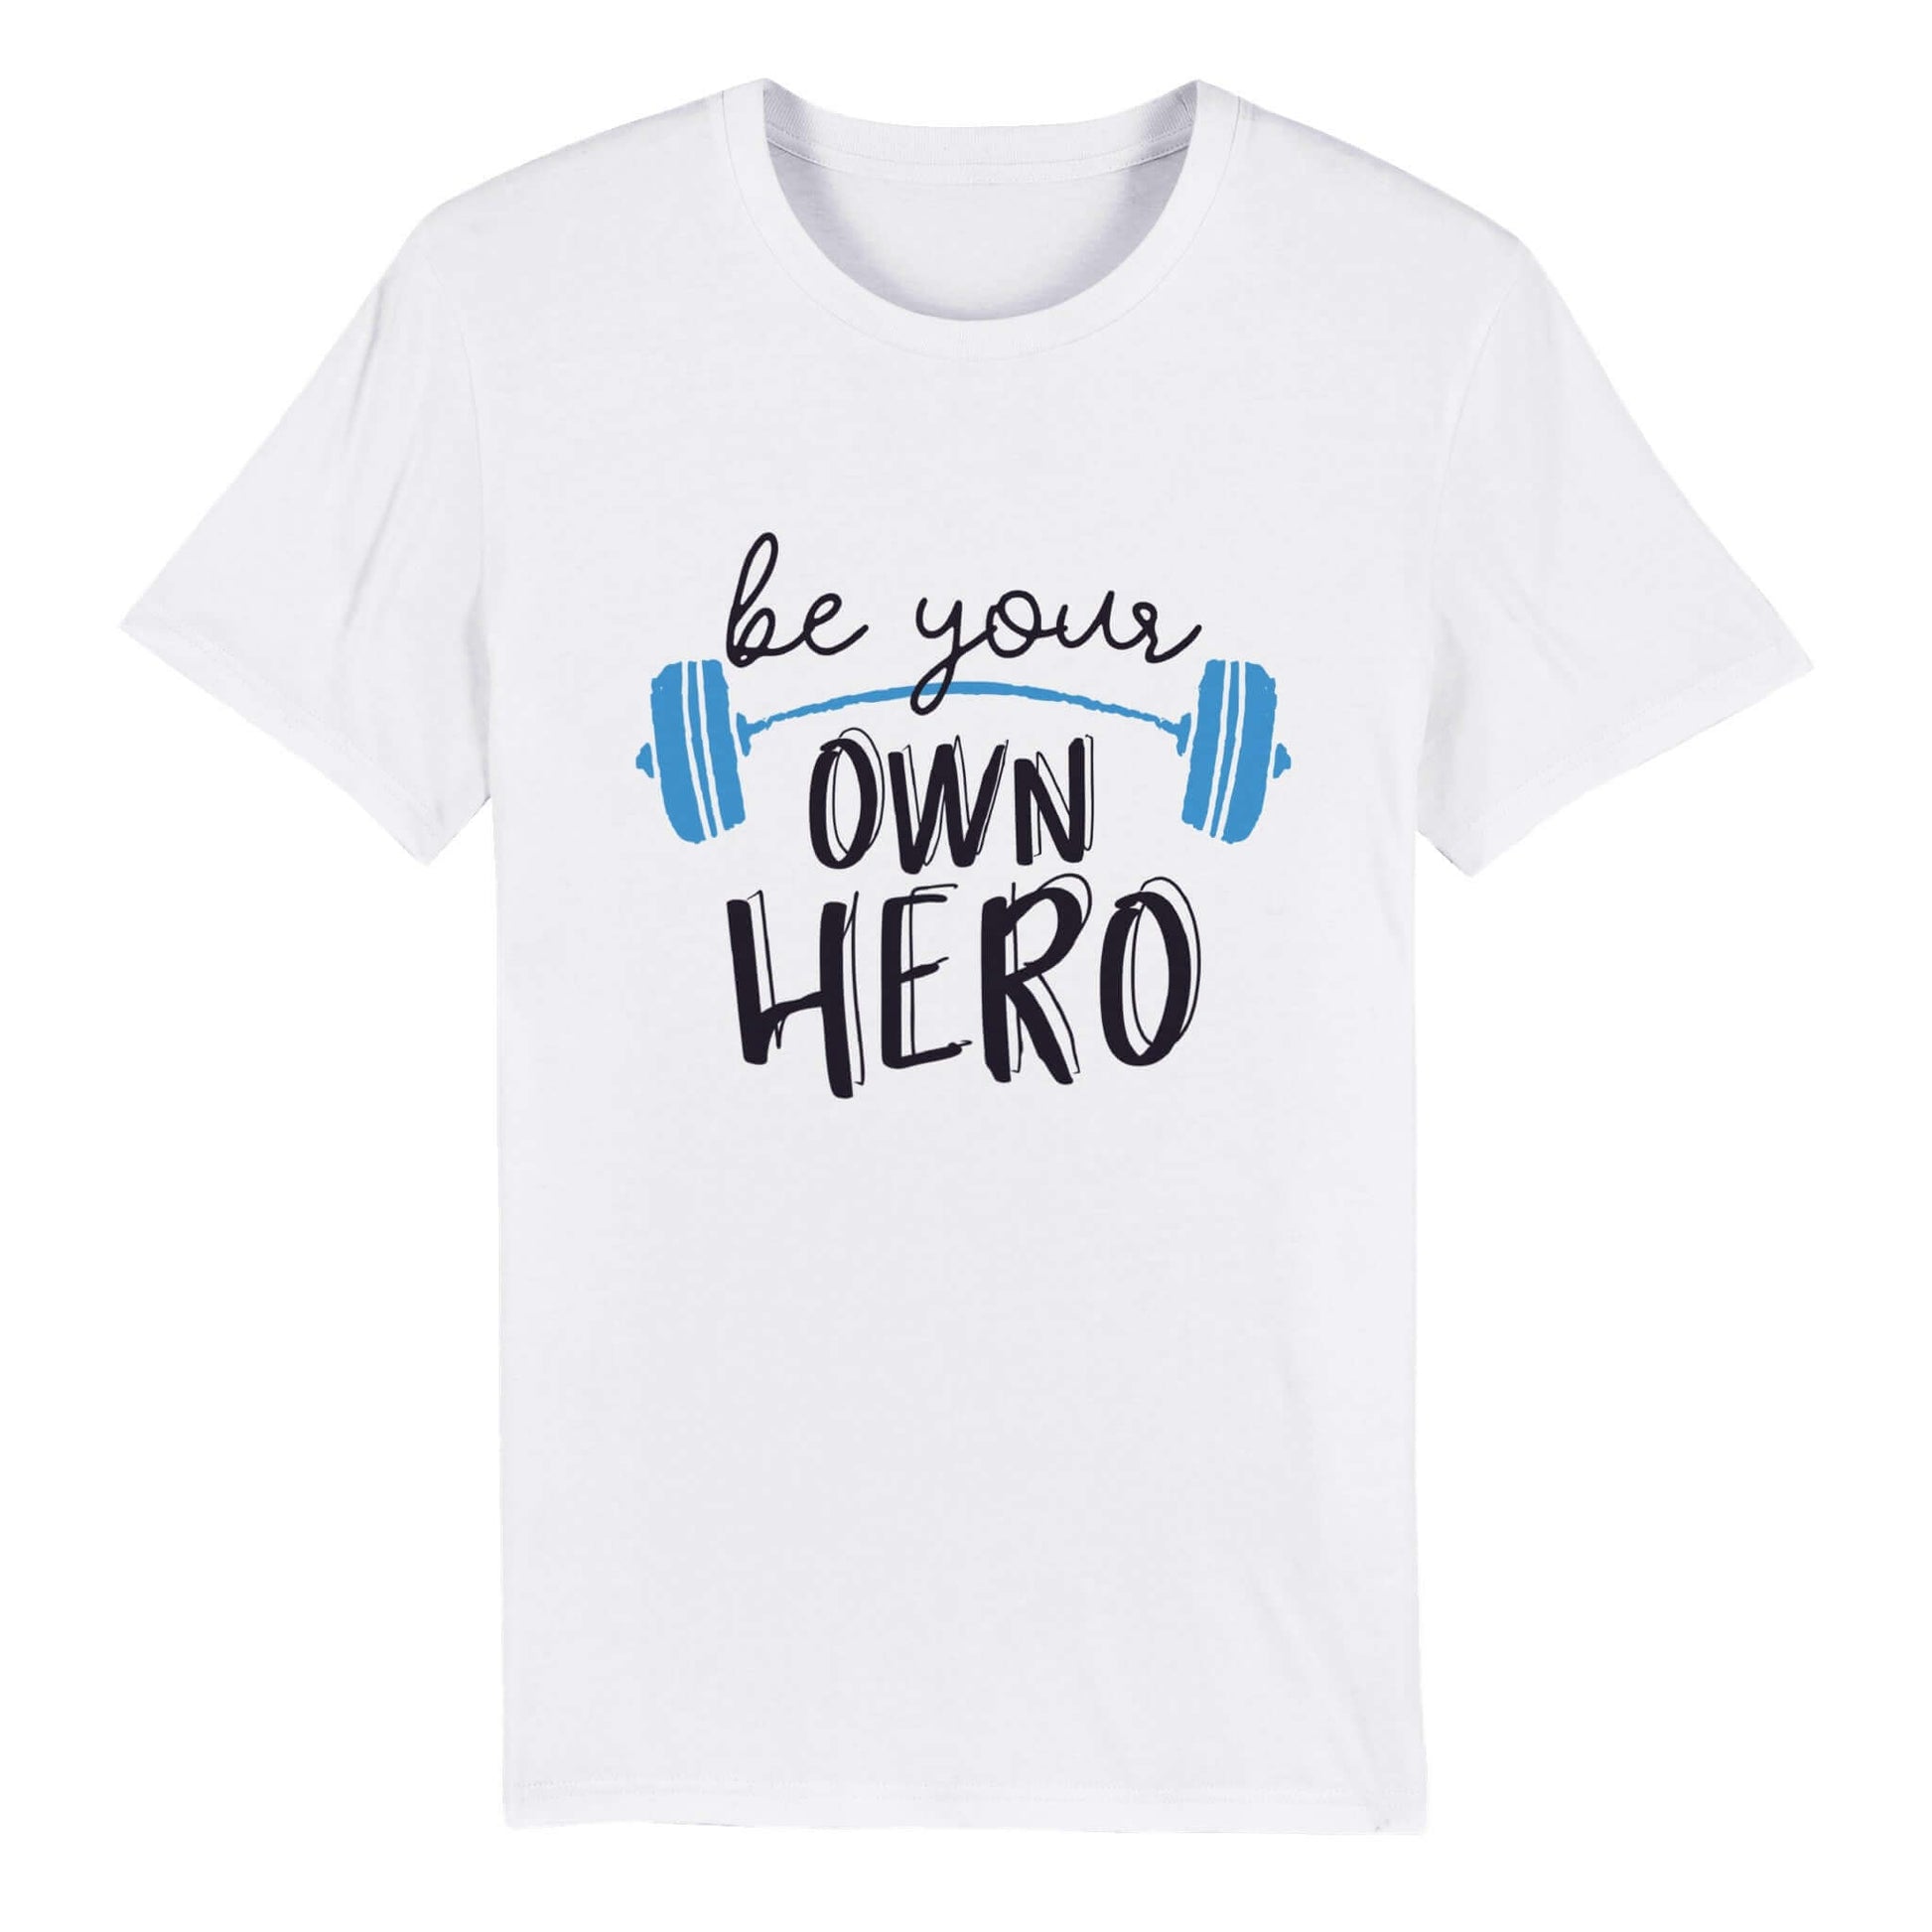 Organic Unisex Crewneck T-shirt "Be your Own Hero" - Just Baskets